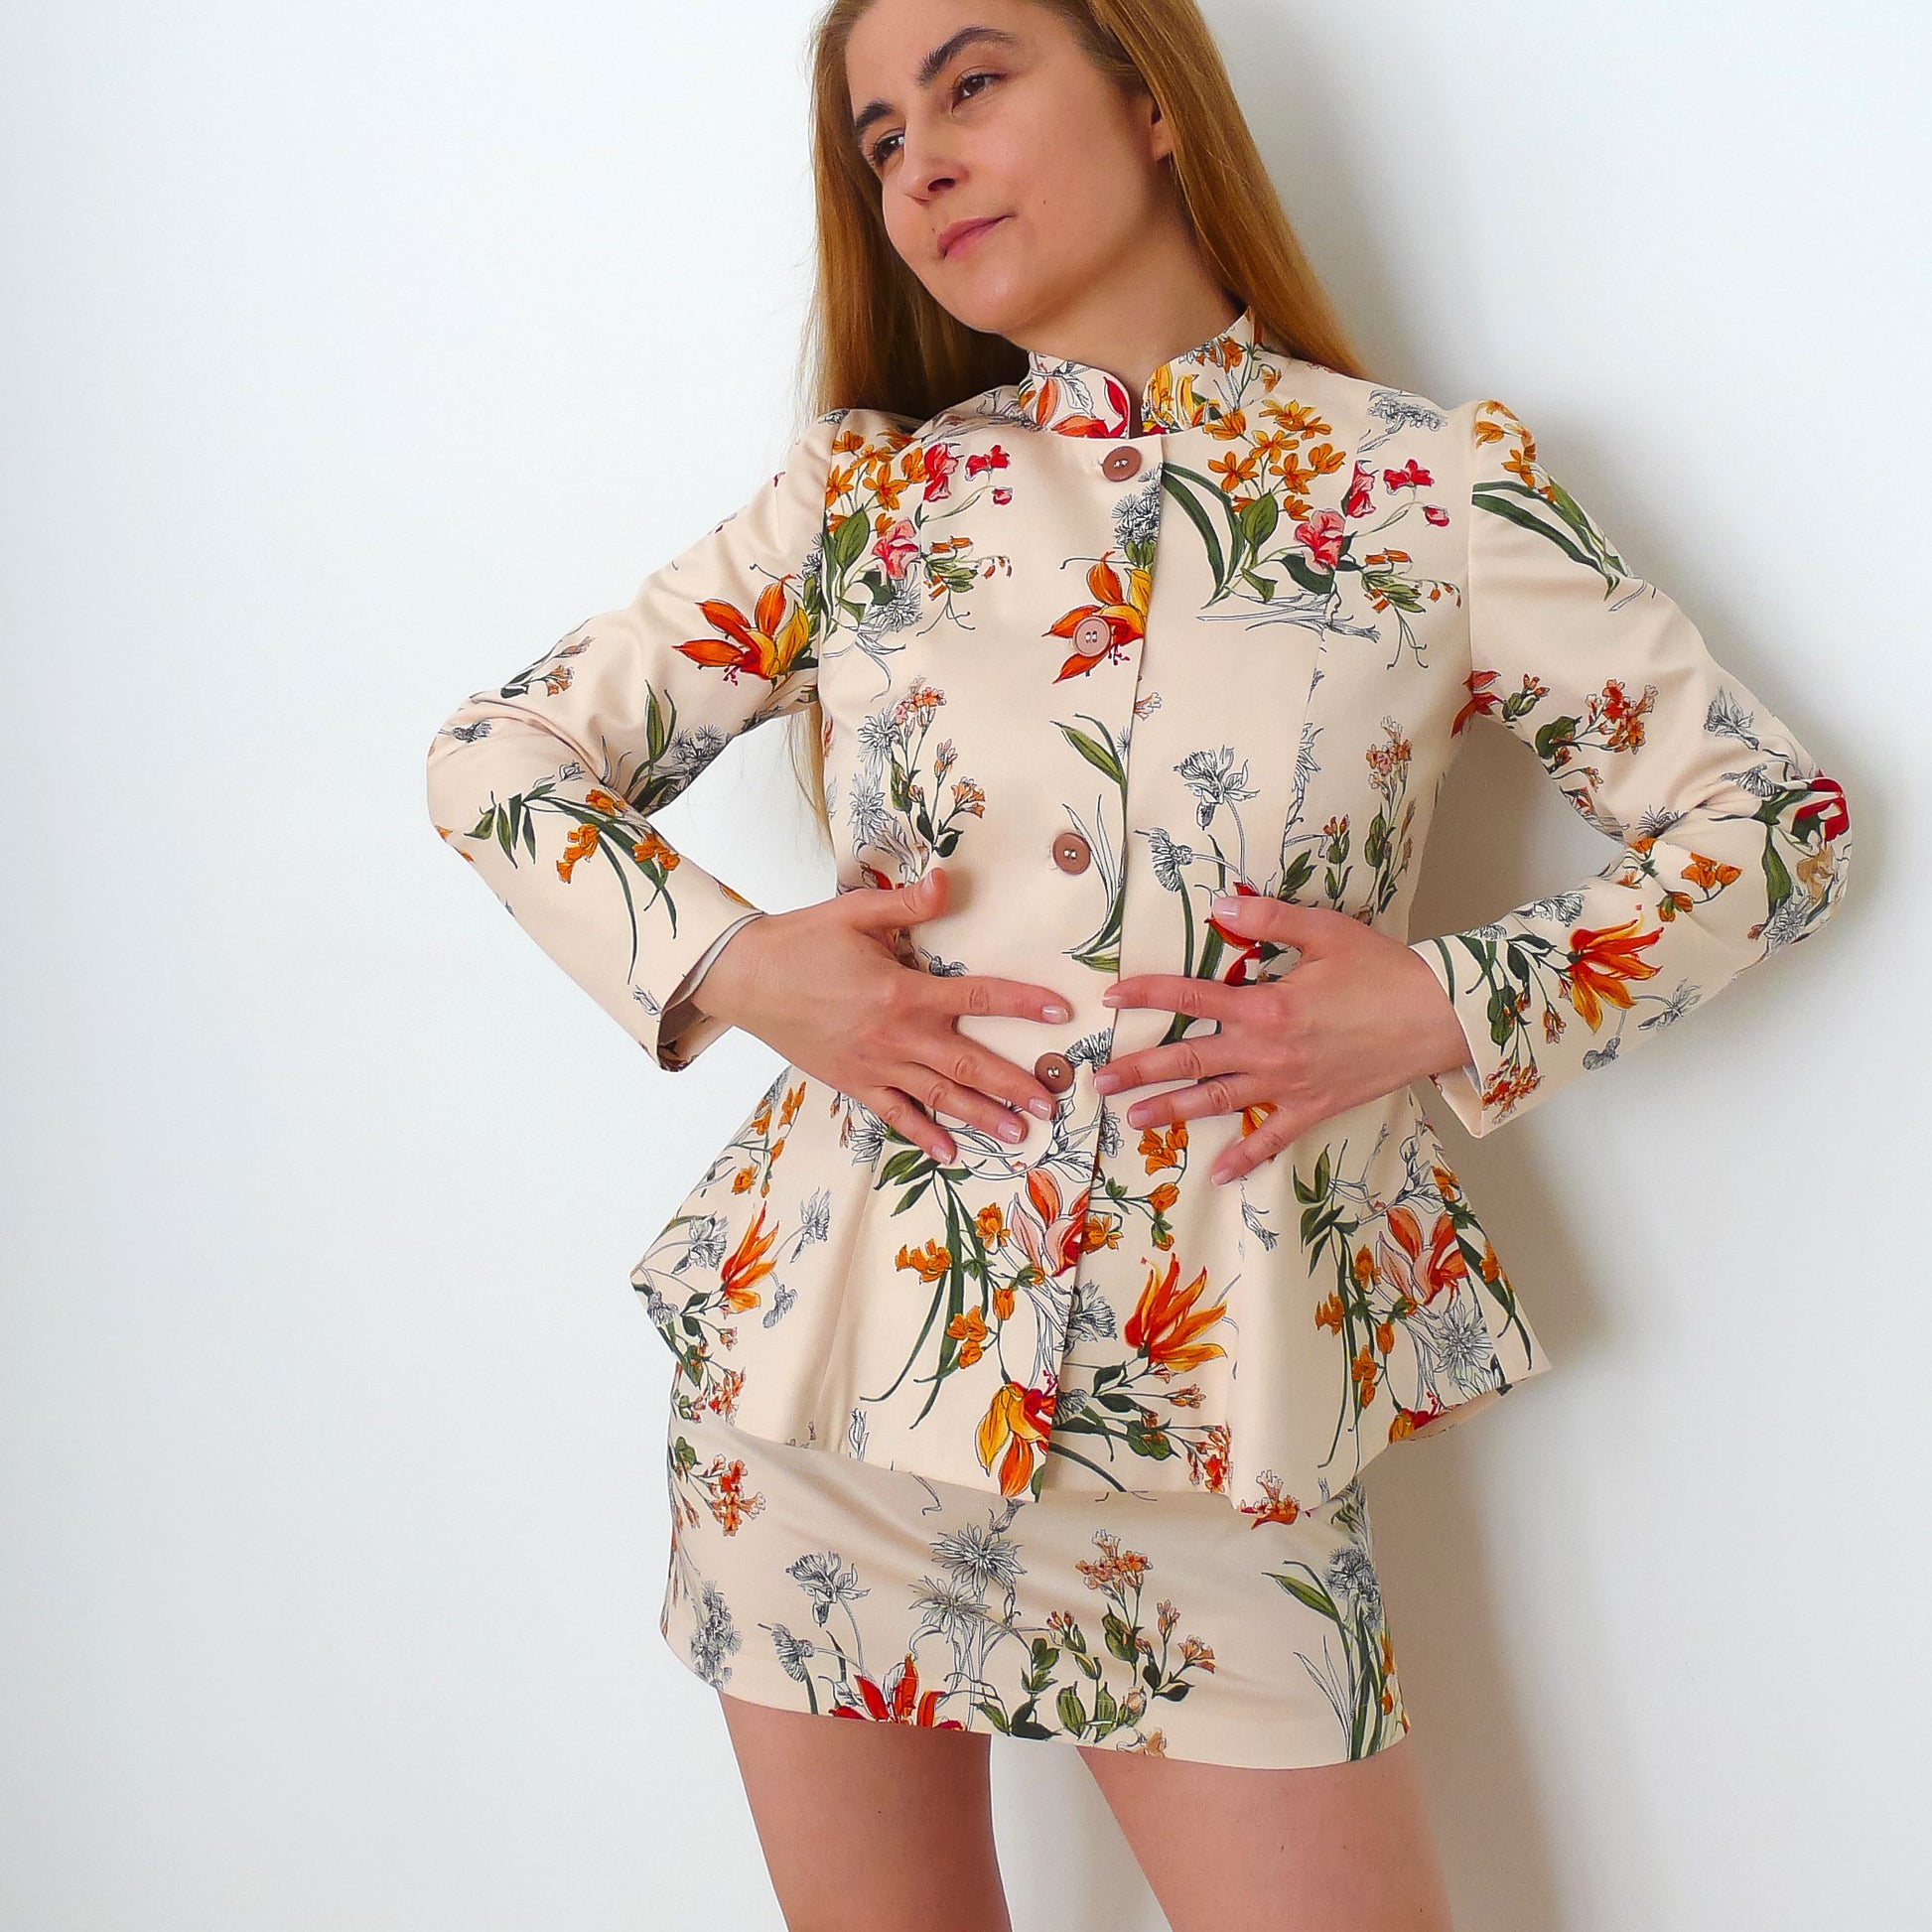 A woman is striking a pose in a floral peplum blazer and a corresponding mini skirt.